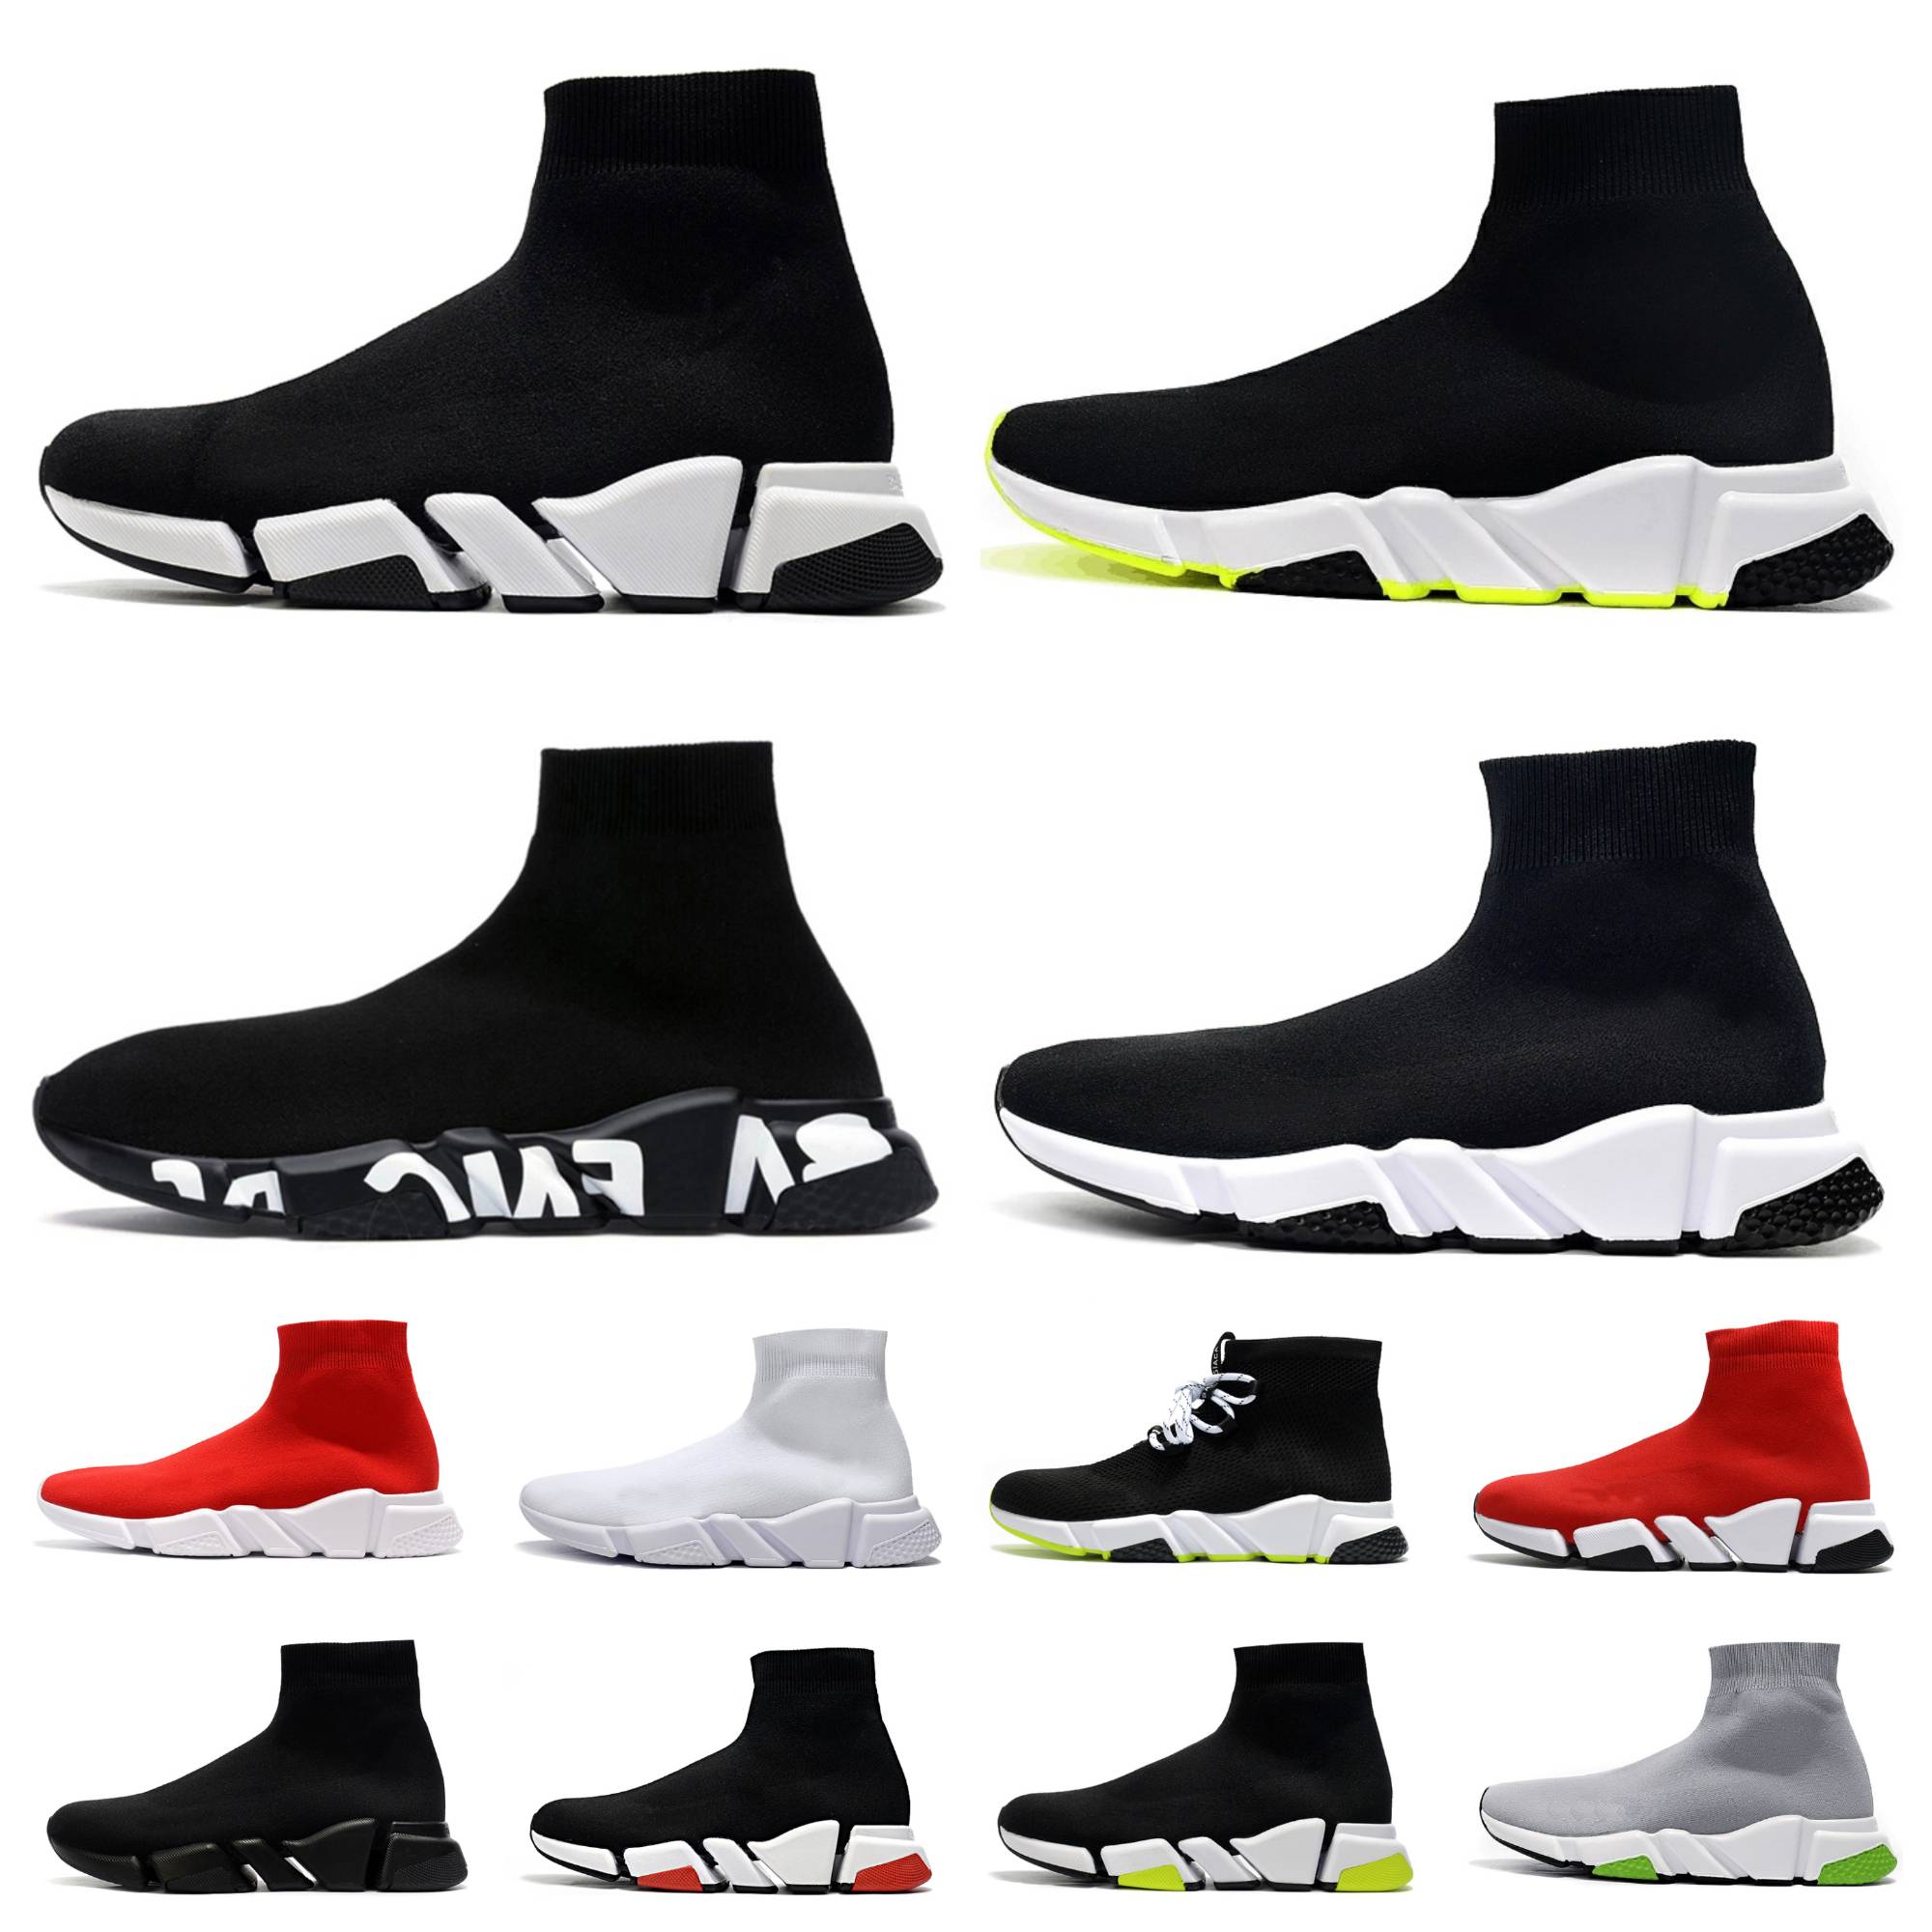 

Designer socks shoes Men Speeds Graffiti Trainers 1.0 2.0 Platform mens runner Lace Up black white Neon sock shoe womens Sneaker Classic speed trainer Casual sneakers, Bubble package bag